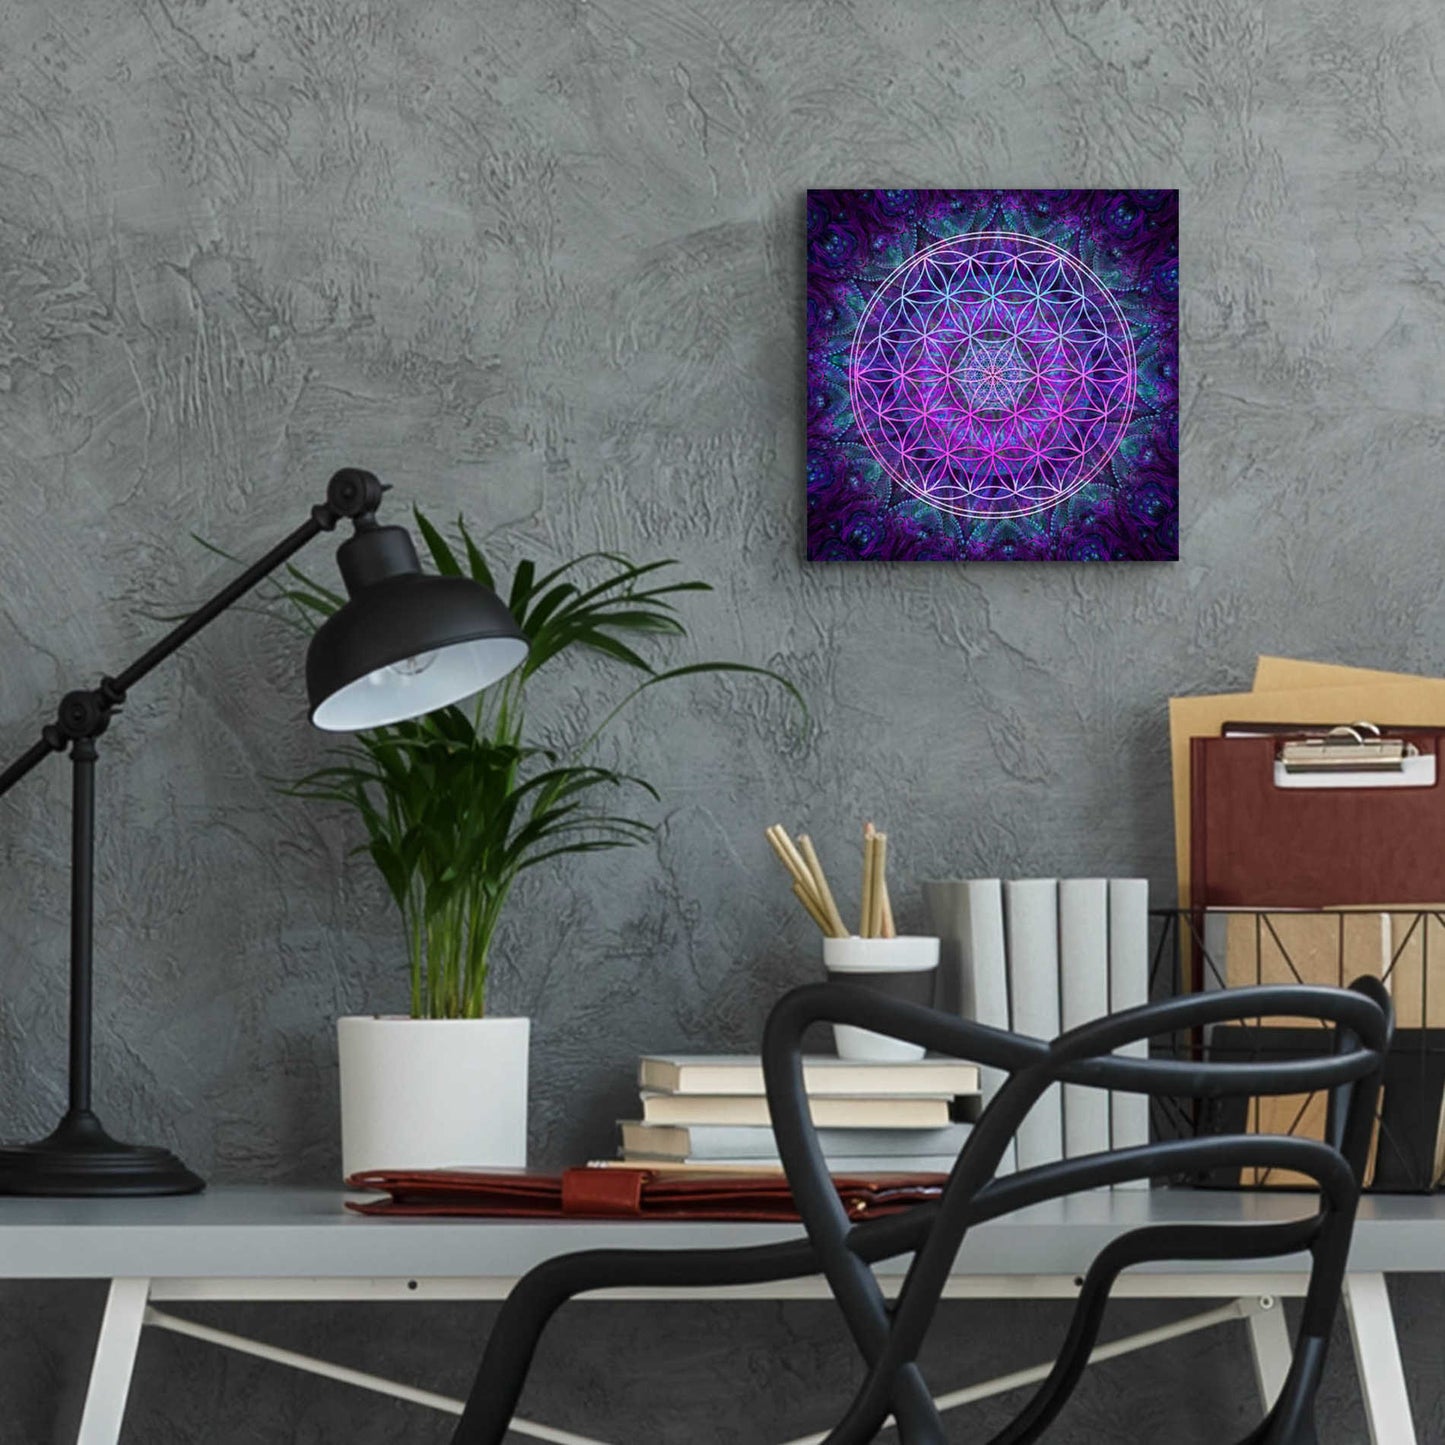 Epic Art 'Flower Of Life' by Cameron Gray Acrylic Glass Wall Art,12x12